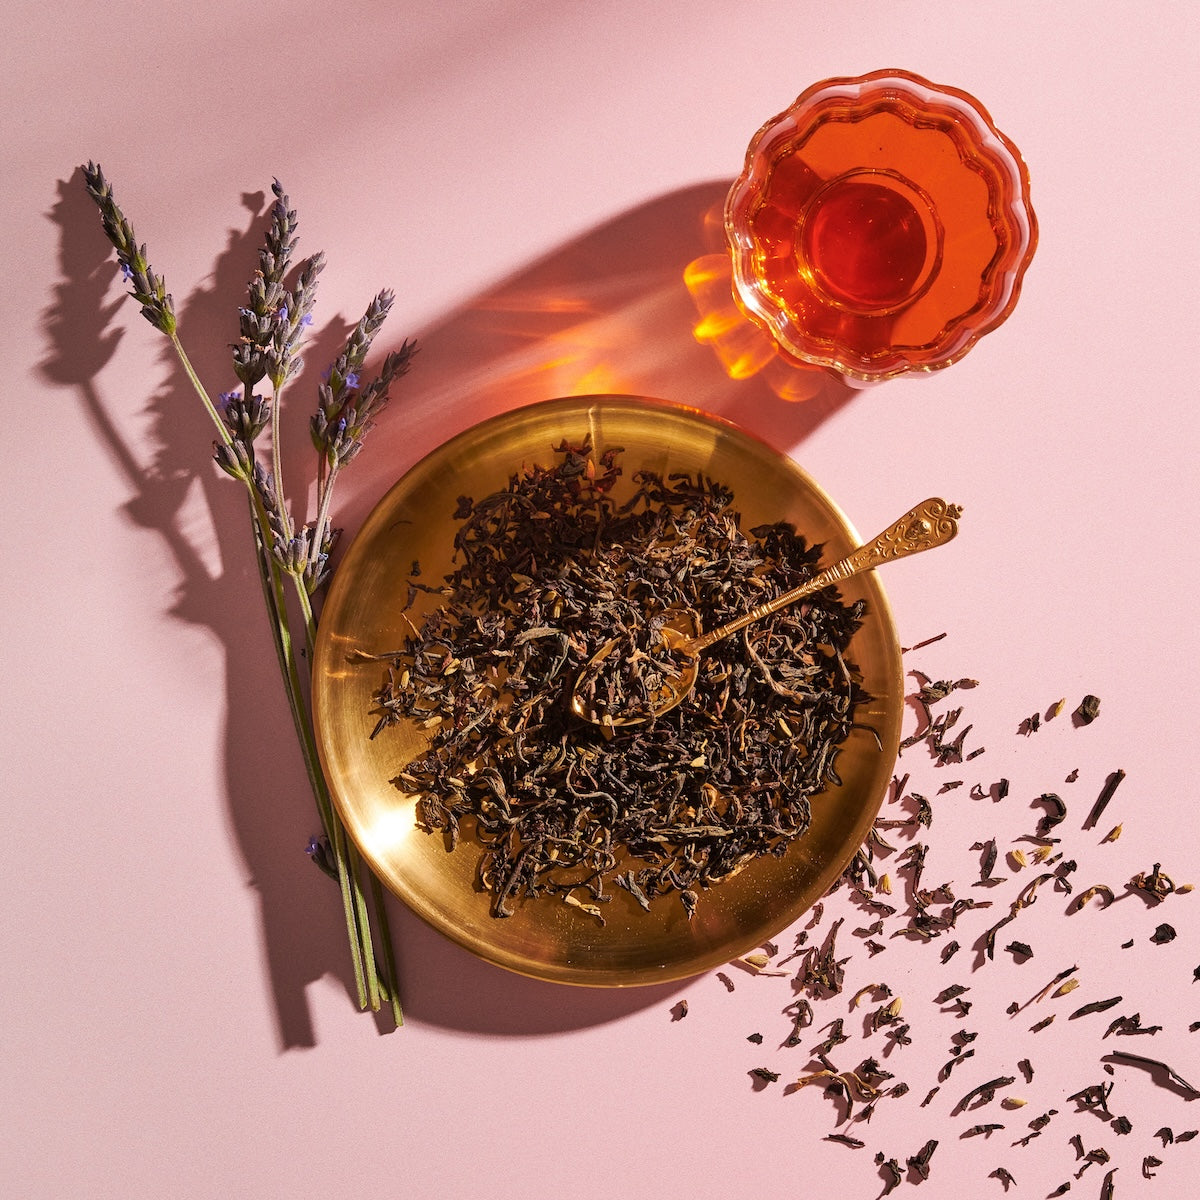 A brass plate filled with loose tea leaves and a brass spoon rests on a pink background. Next to the plate is a glass cup of Magic Hour's Goddess of Earl: Lavender London Fog - Tea for Blooming Clarity & Calm Moods, with some lavender sprigs lying adjacent. Tea leaves are scattered around the plate, enhancing the scene's relaxation and calm focus.